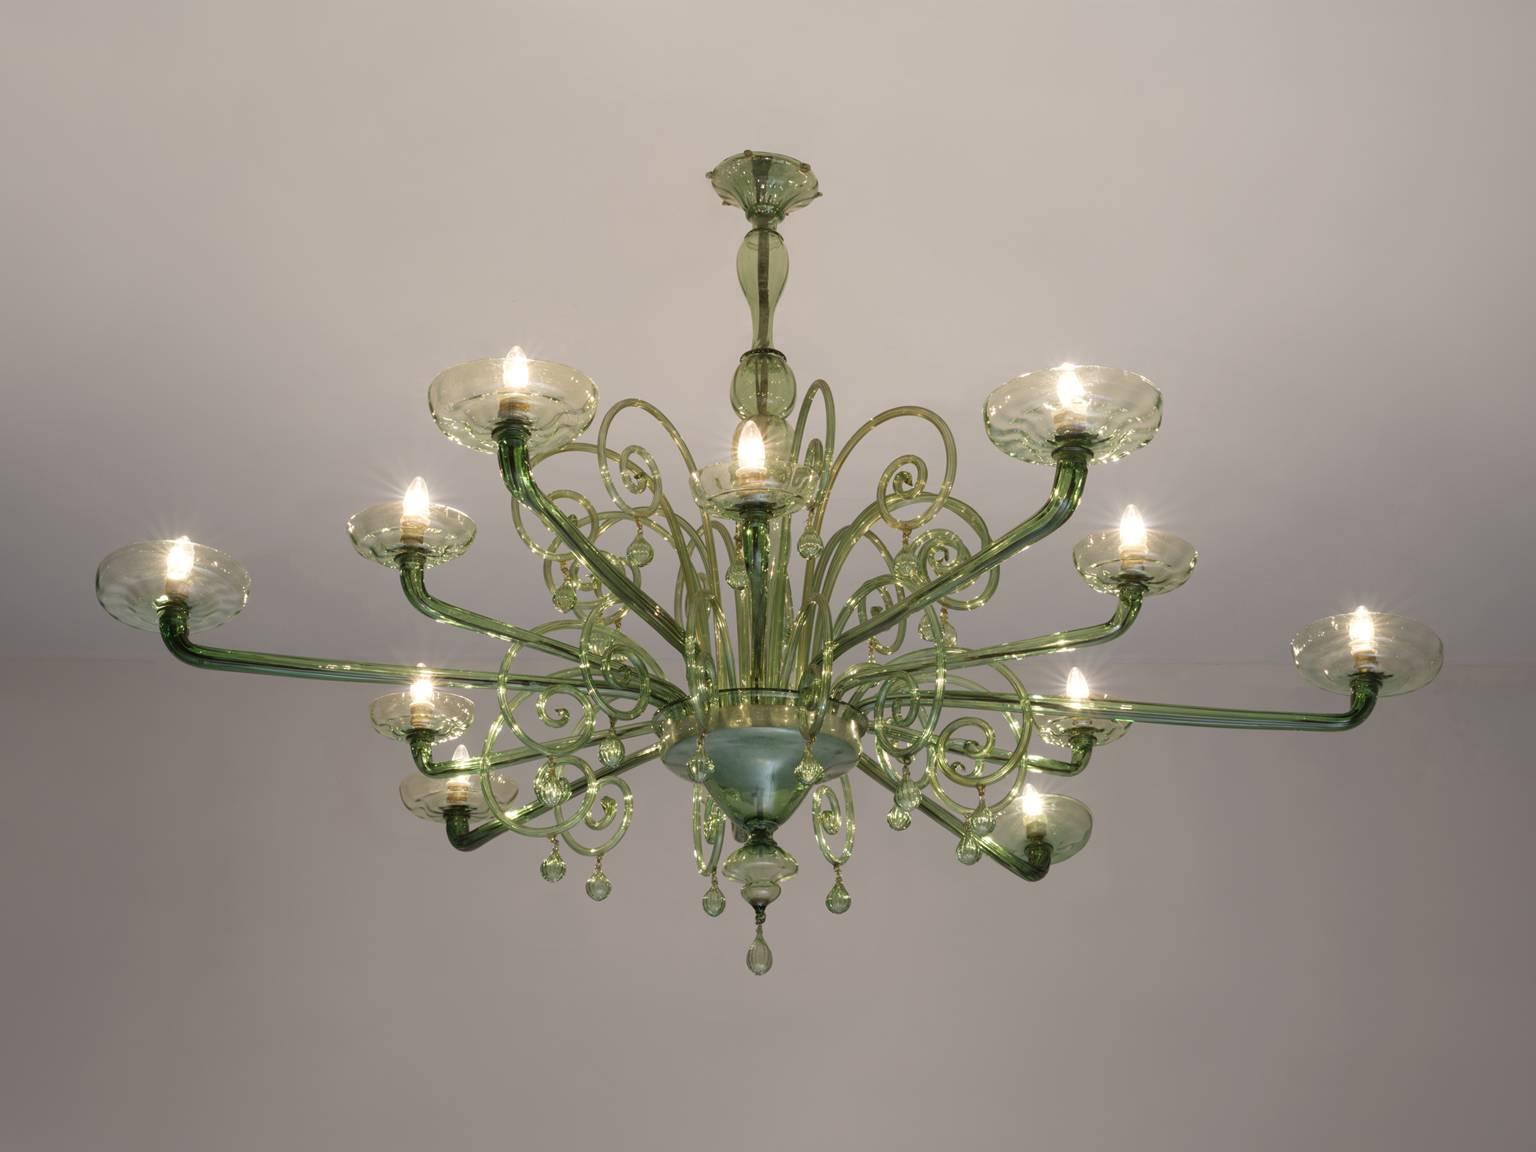 Venini Chandelier, Murano glass and metal, 1930s, Venice, Italy. 

This large Murano glass chandelier has six large arms and six smaller arms which create a stunning light-partition. The chandelier is attributed to Napoleone Martinuzzi for Venini.